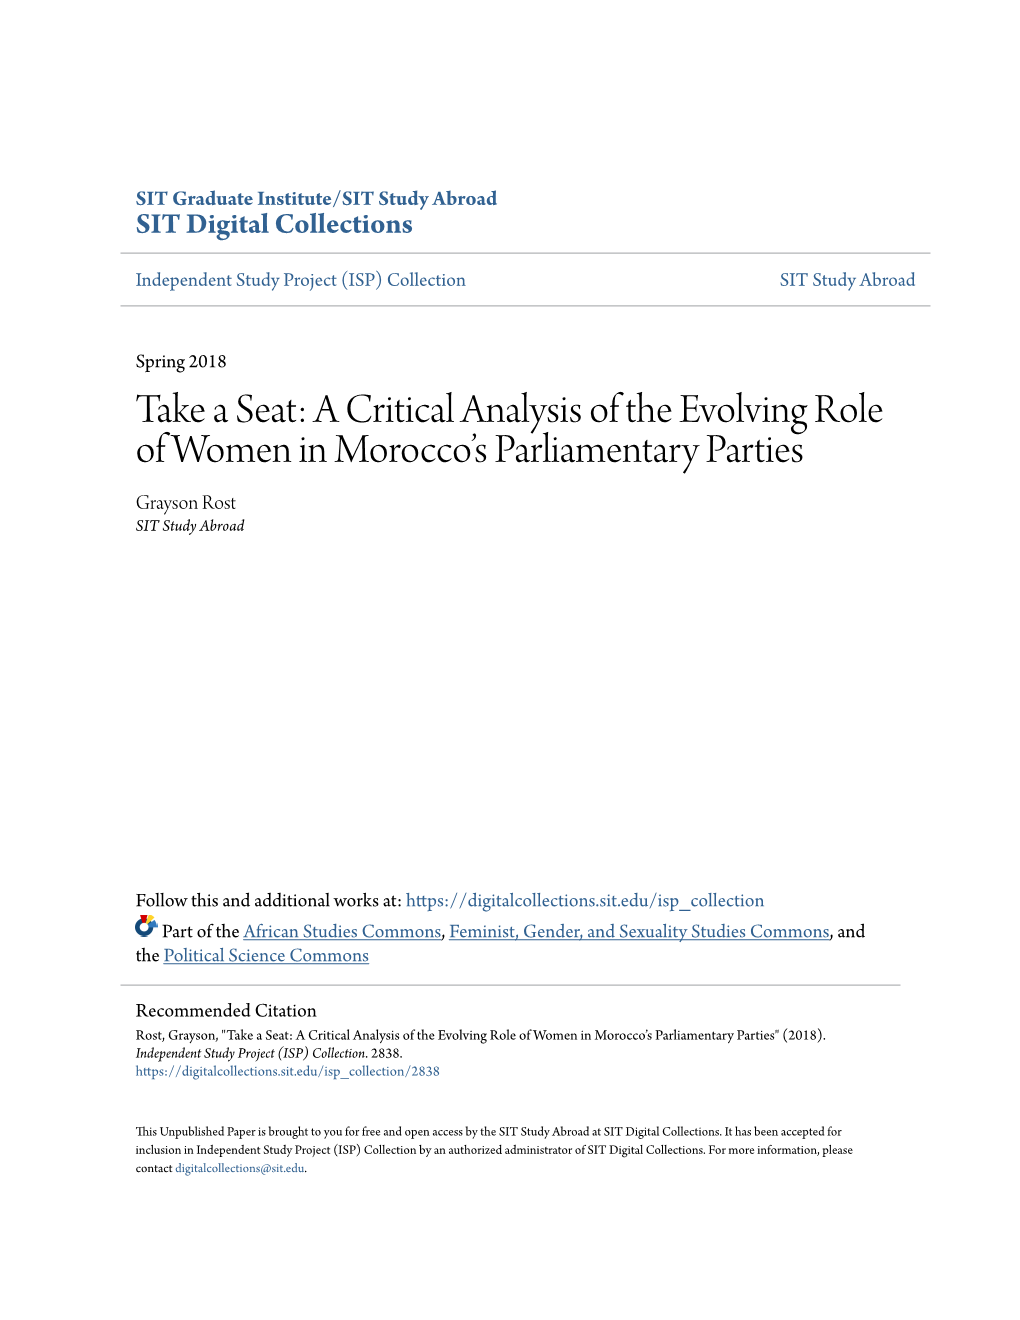 A Critical Analysis of the Evolving Role of Women in Morocco's